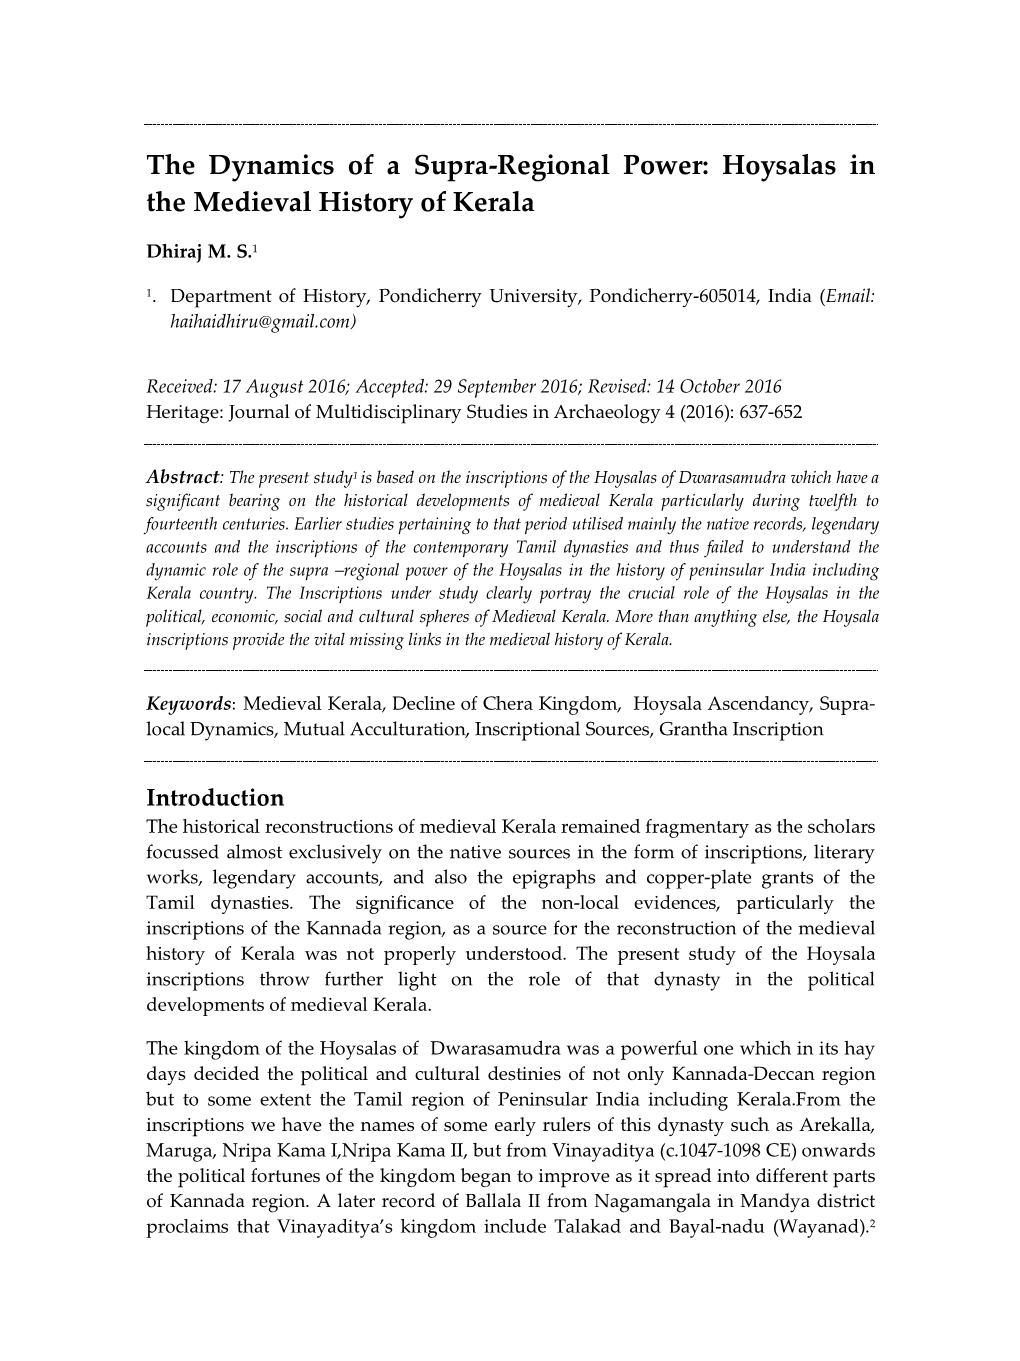 Hoysalas in the Medieval History of Kerala